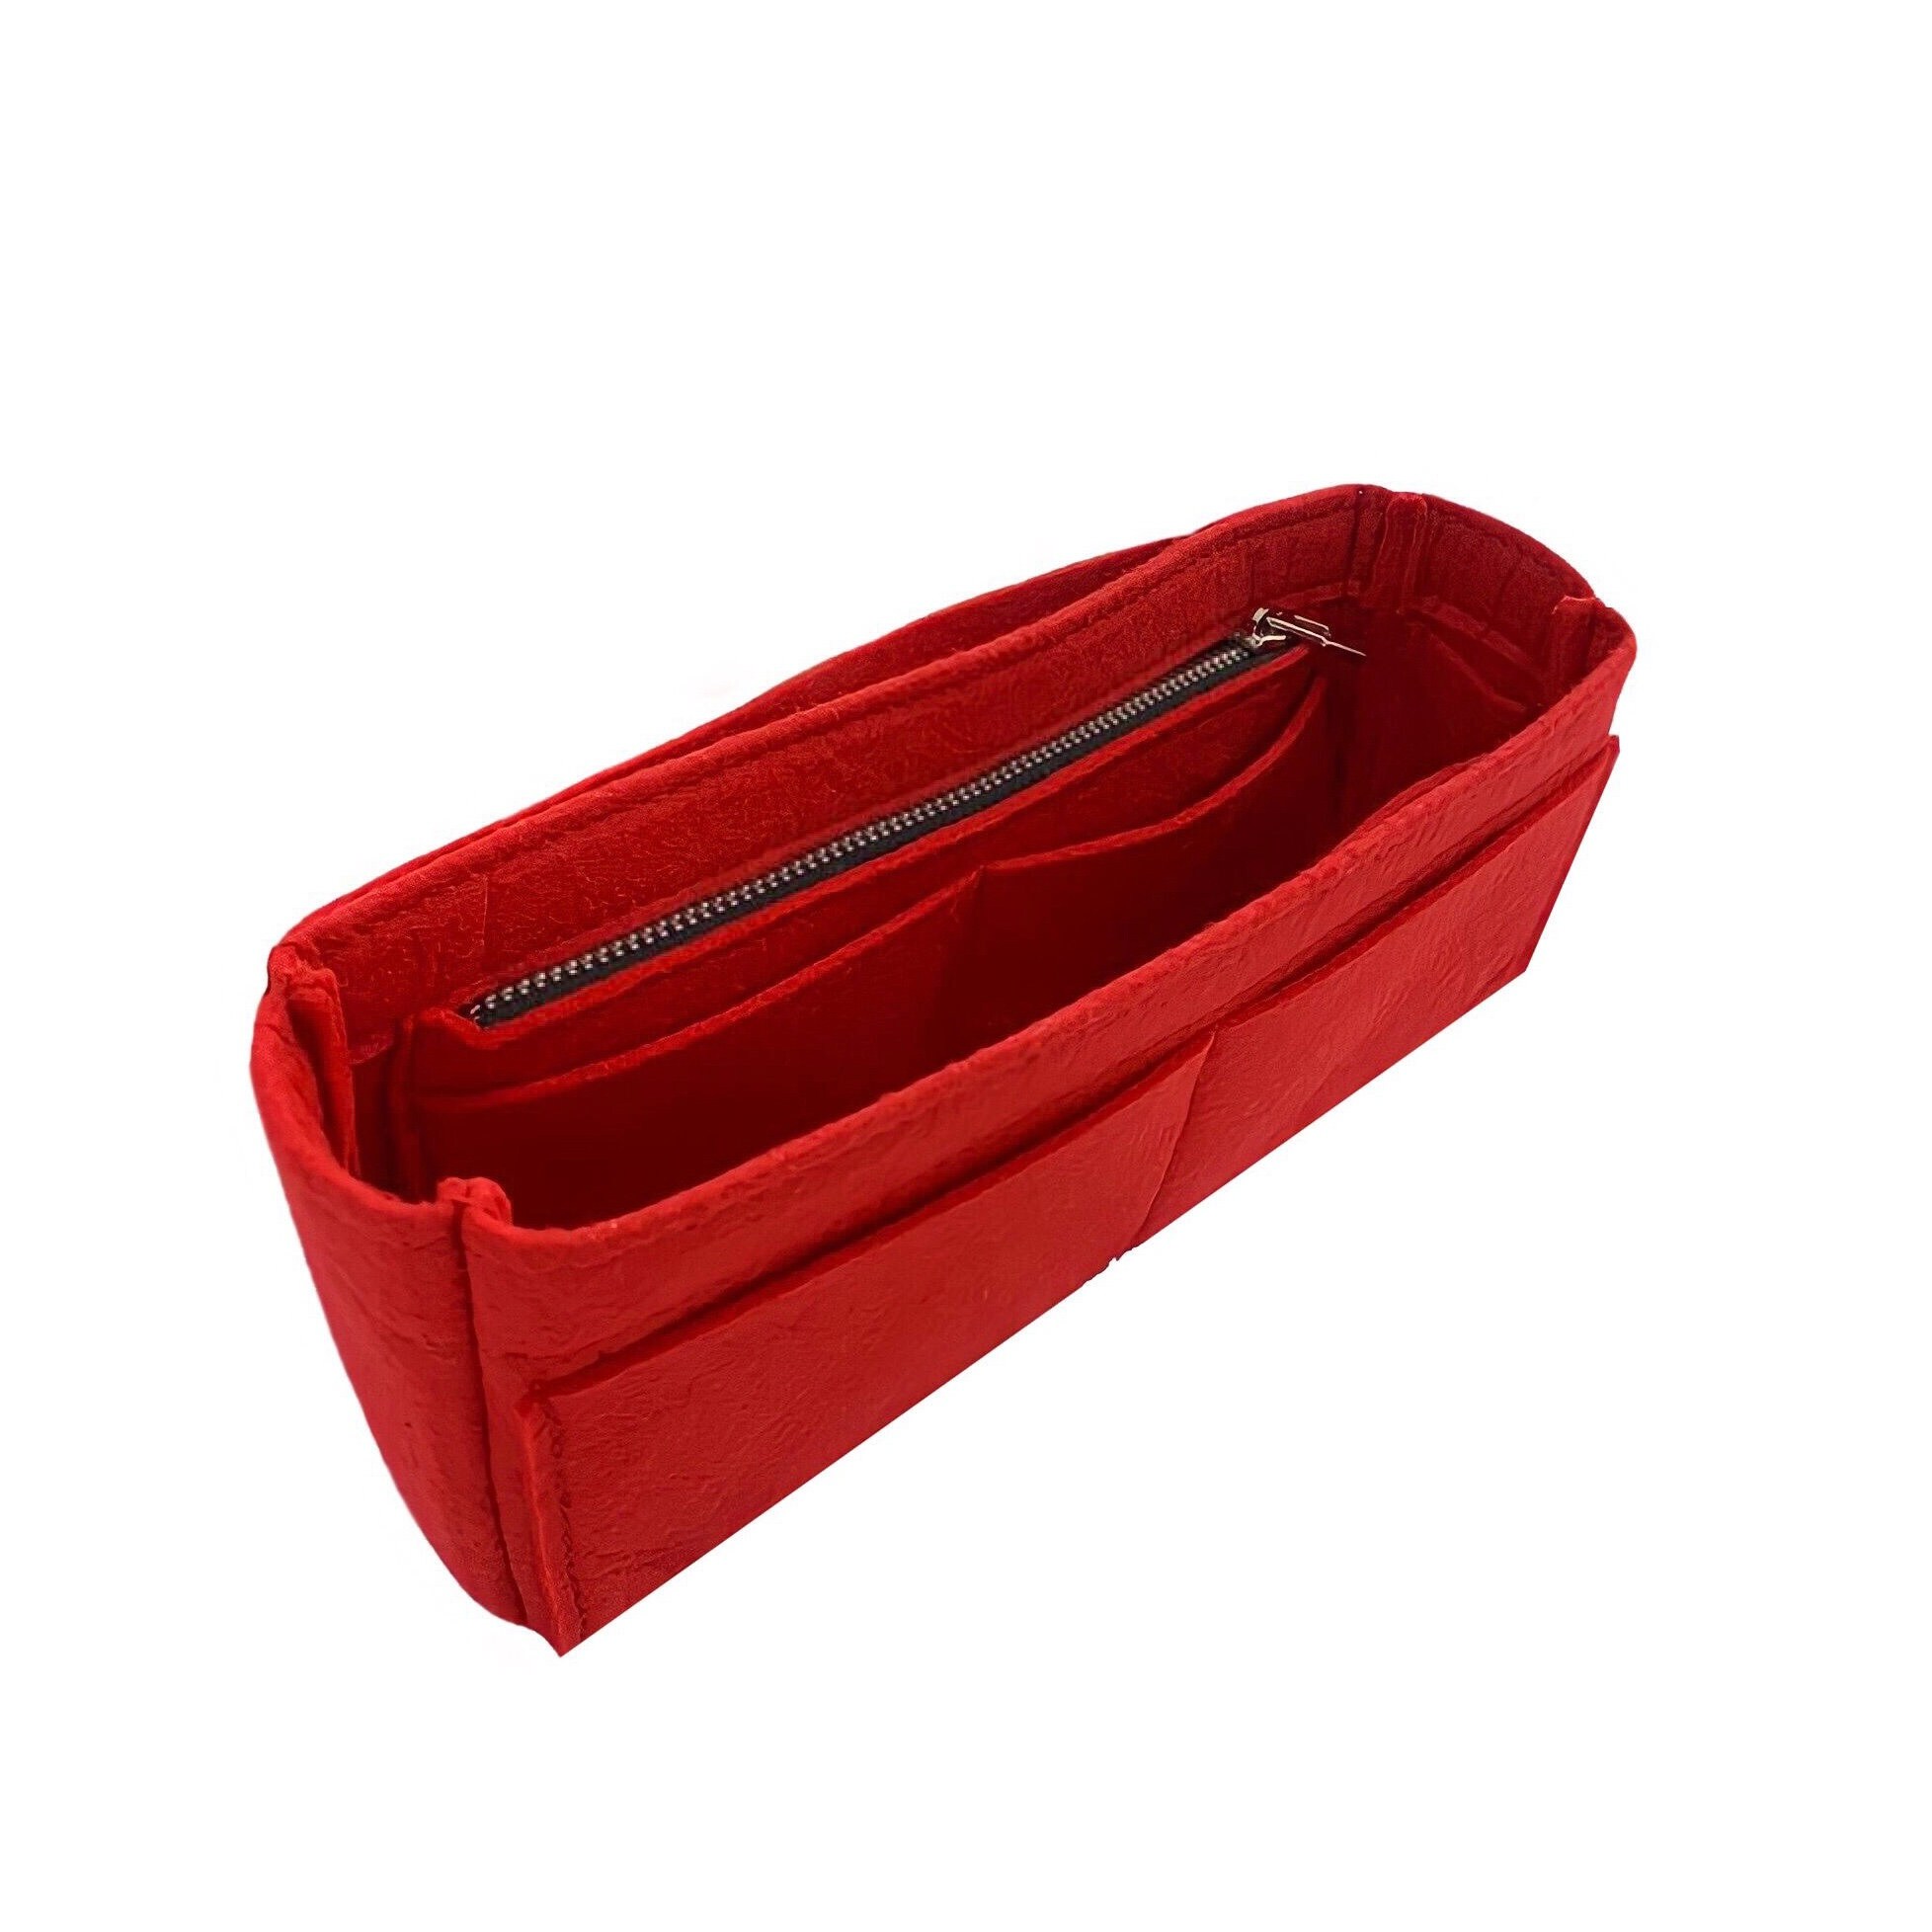 (D-Toujours-S) Bag Organizer for D Toujours Small Bag